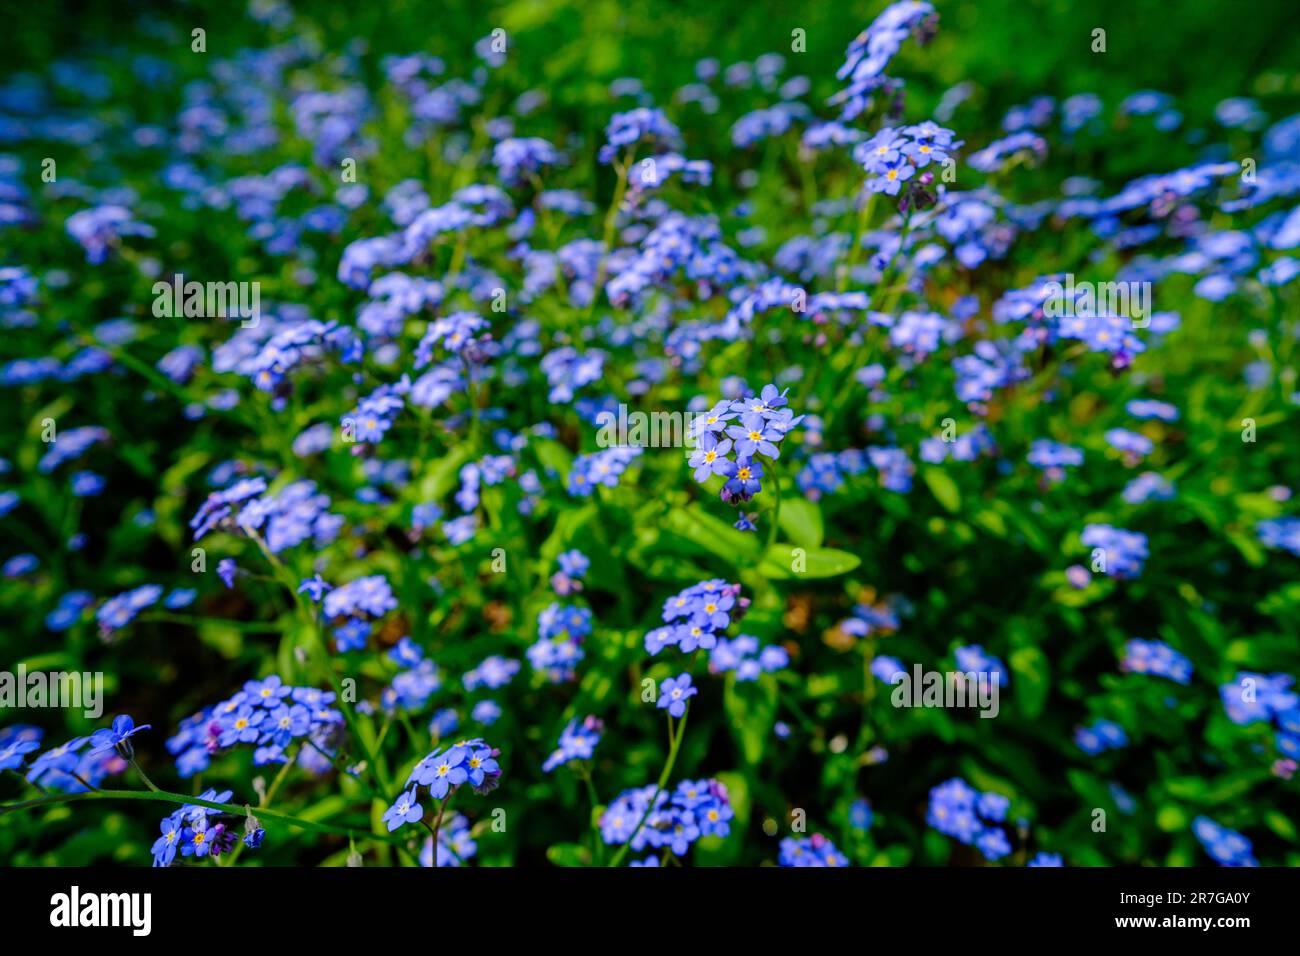 Small delicate sky blue forest flowers on a sunny day blurred forest background. Stock Photo